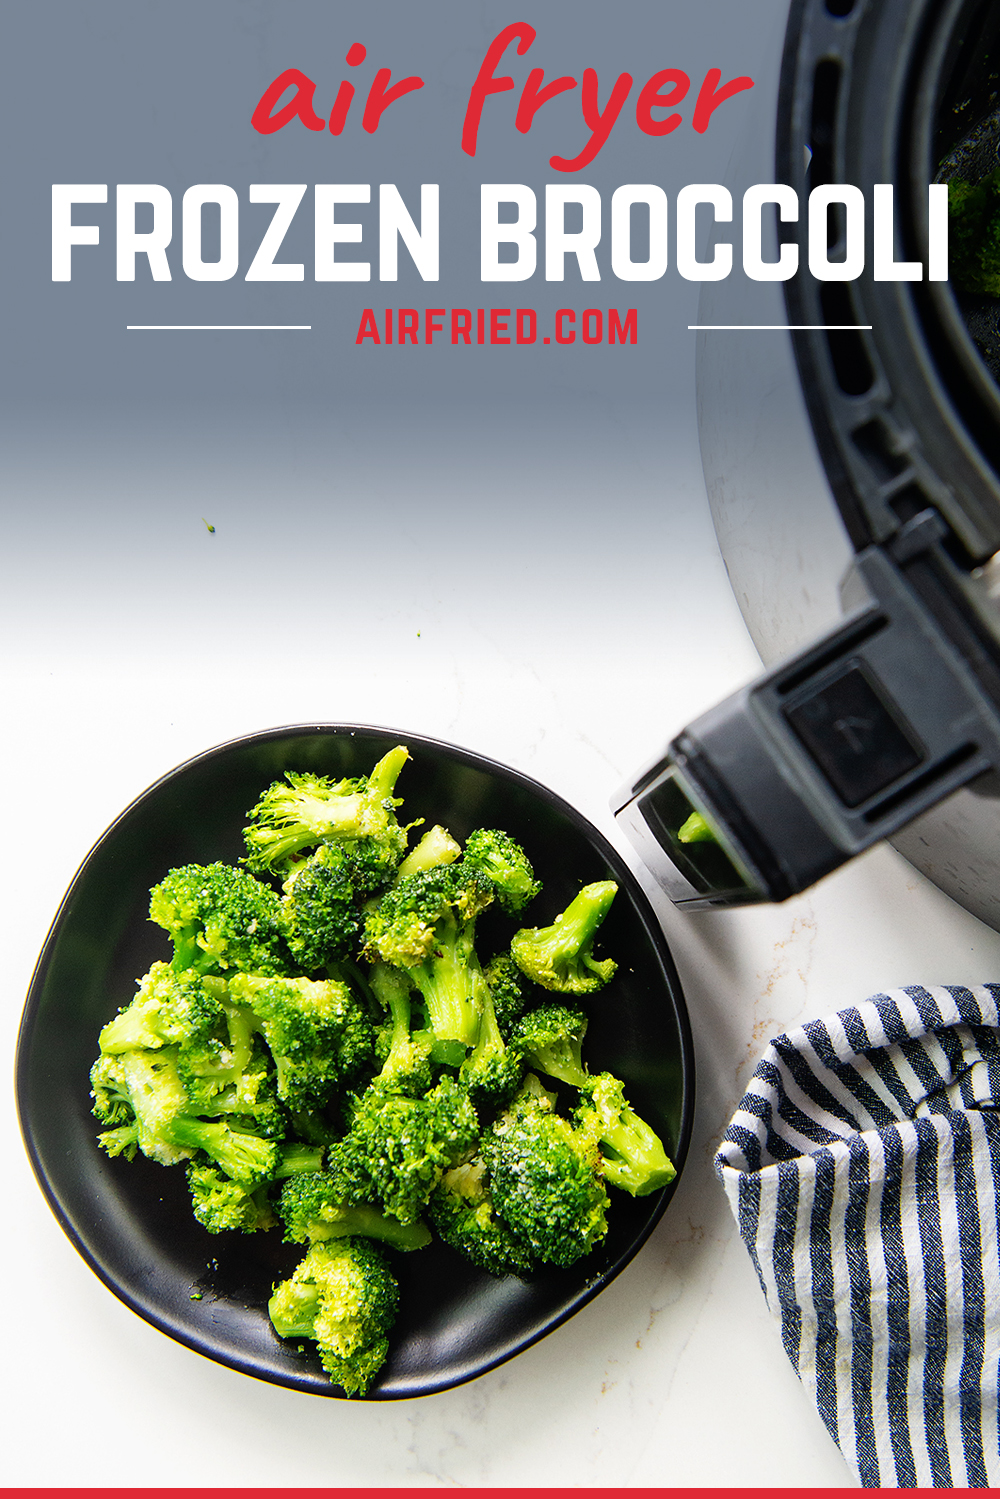 If you need an easy way to cook frozen broccoli, that tastes great, look no further than the air fryer!